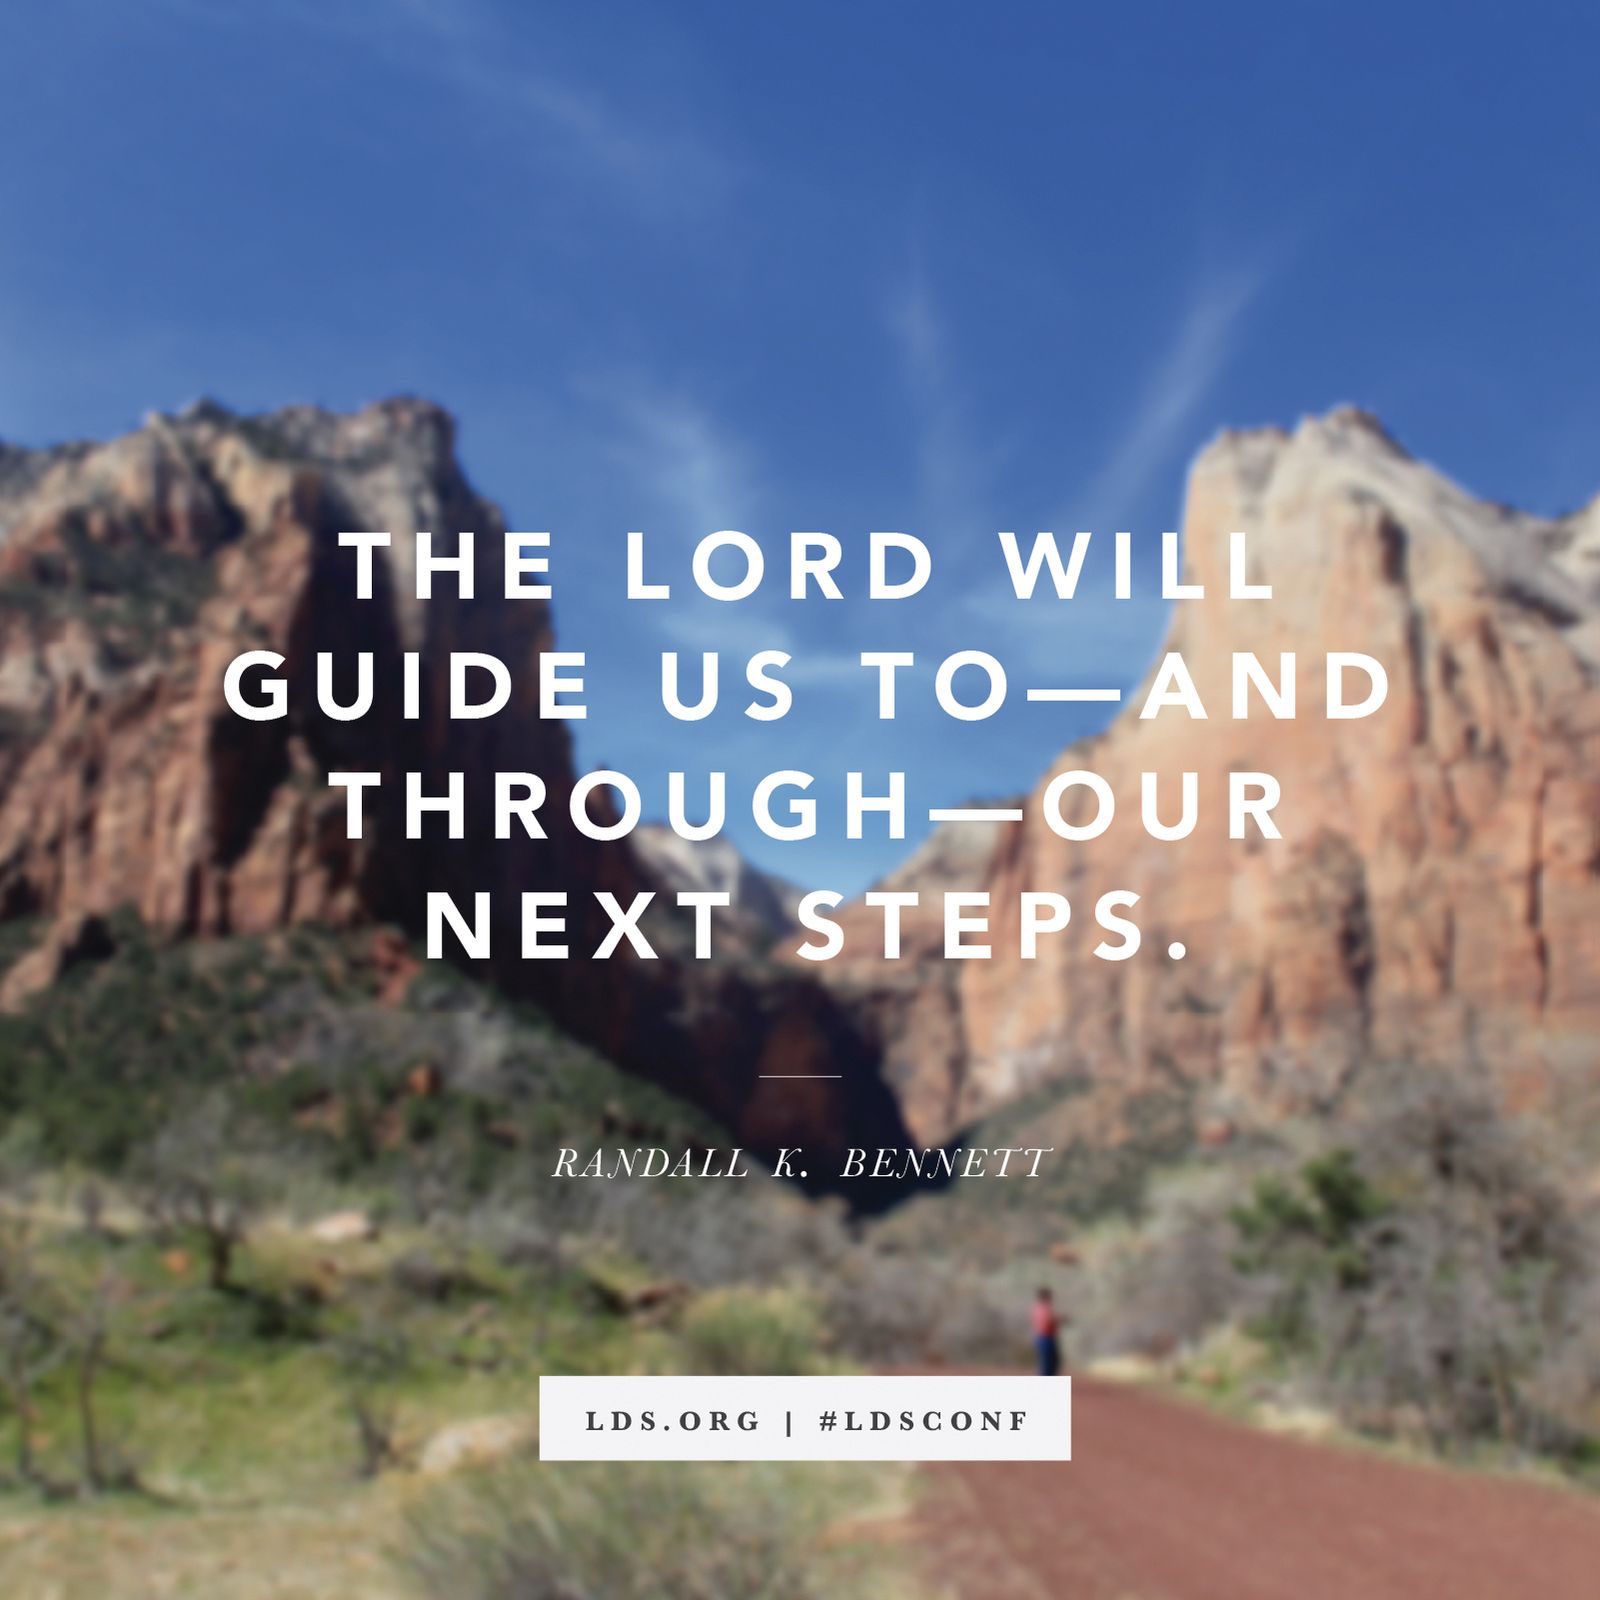 “The Lord will guide us to—and through—our next steps.” —Elder Randall K. Bennett, “Your Next Step”